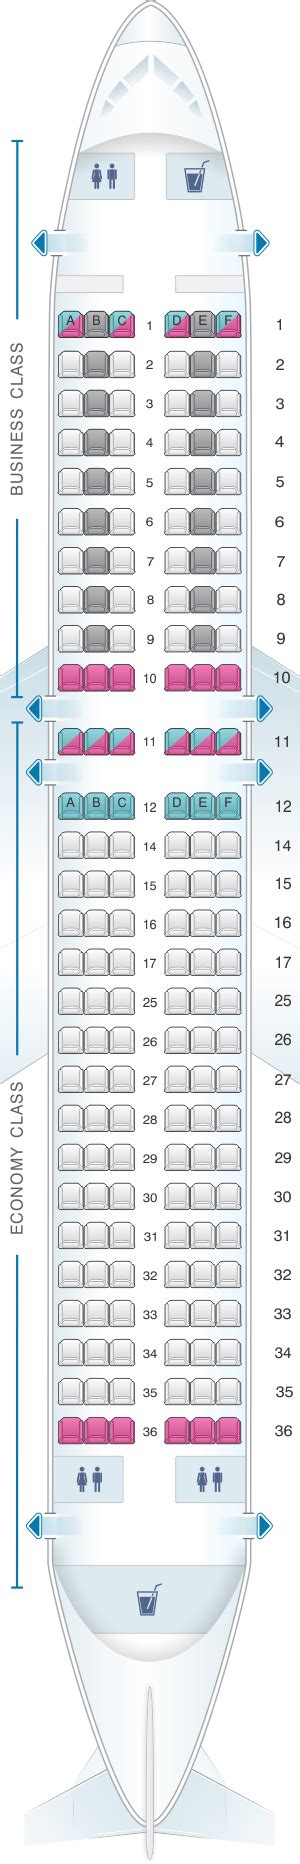 Seat Map Swiss Airbus A320 214